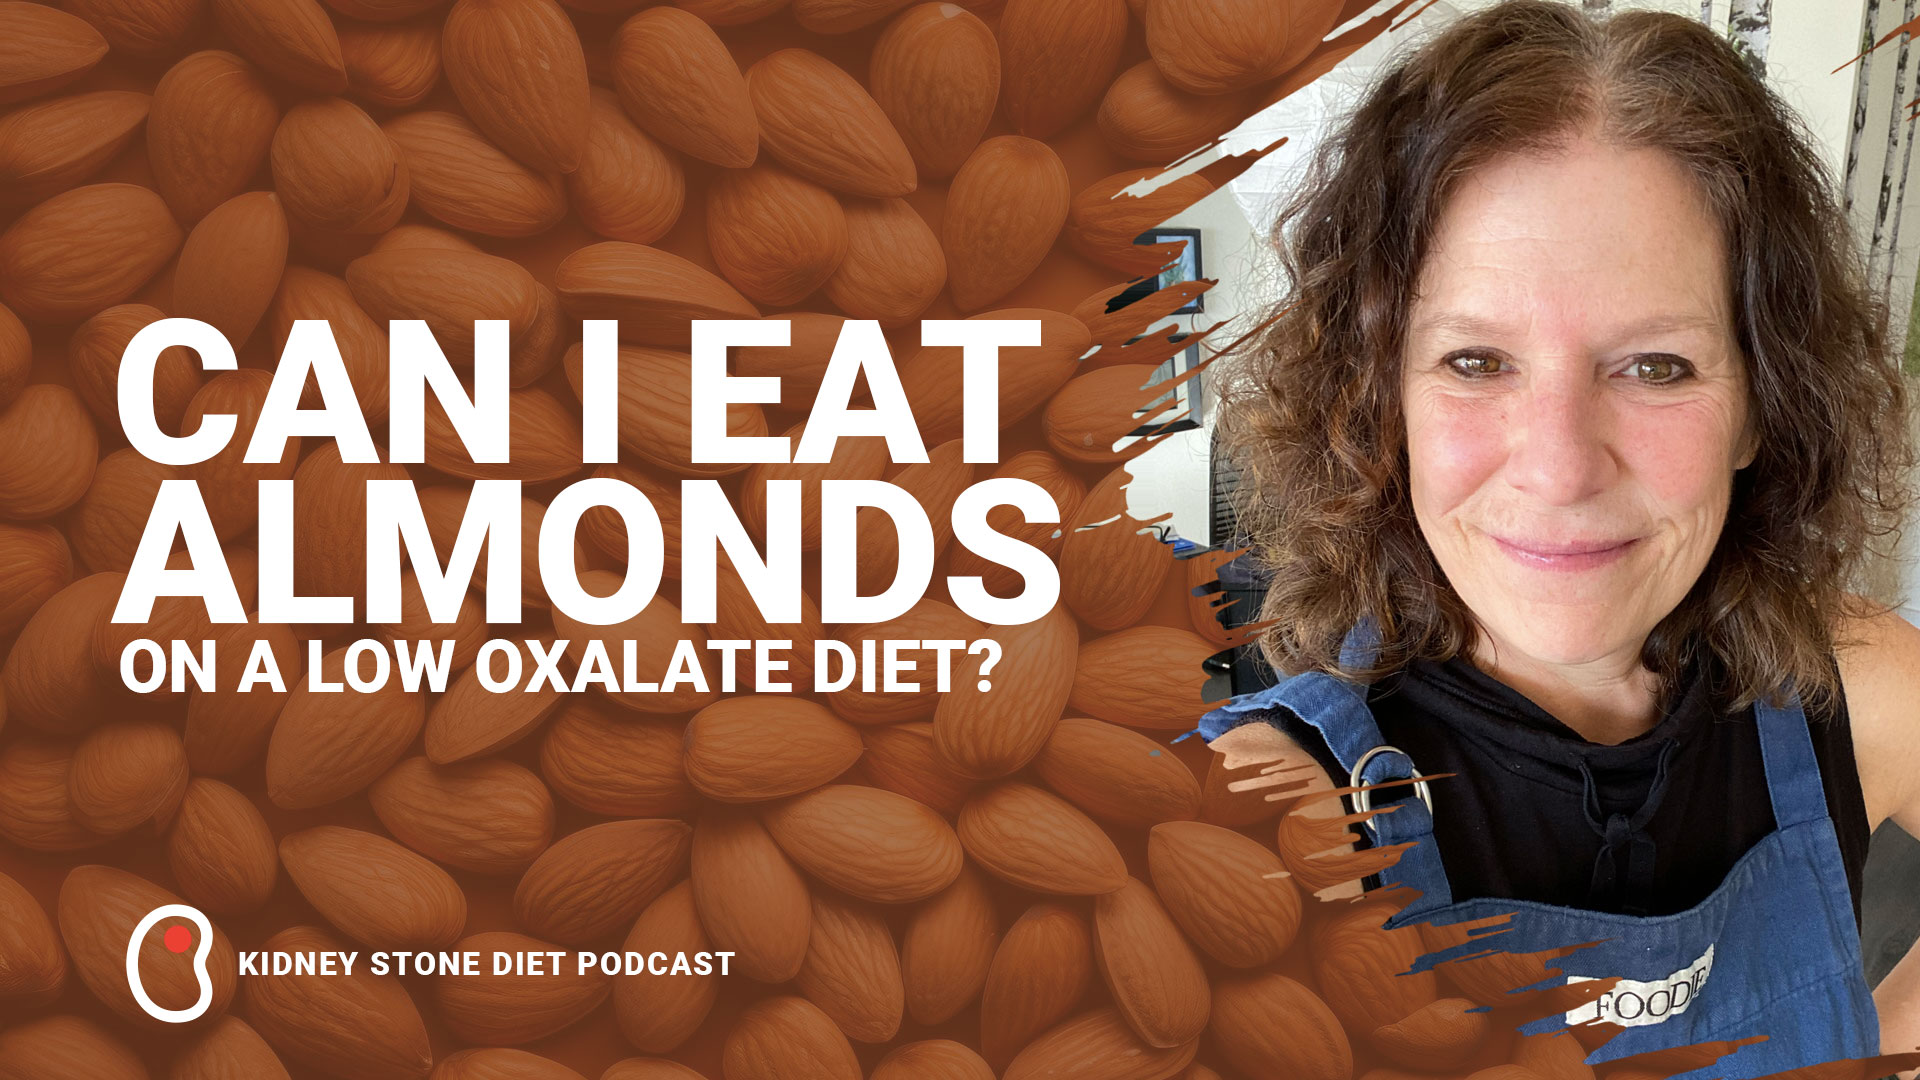 Can I eat almonds on a low oxalate diet?